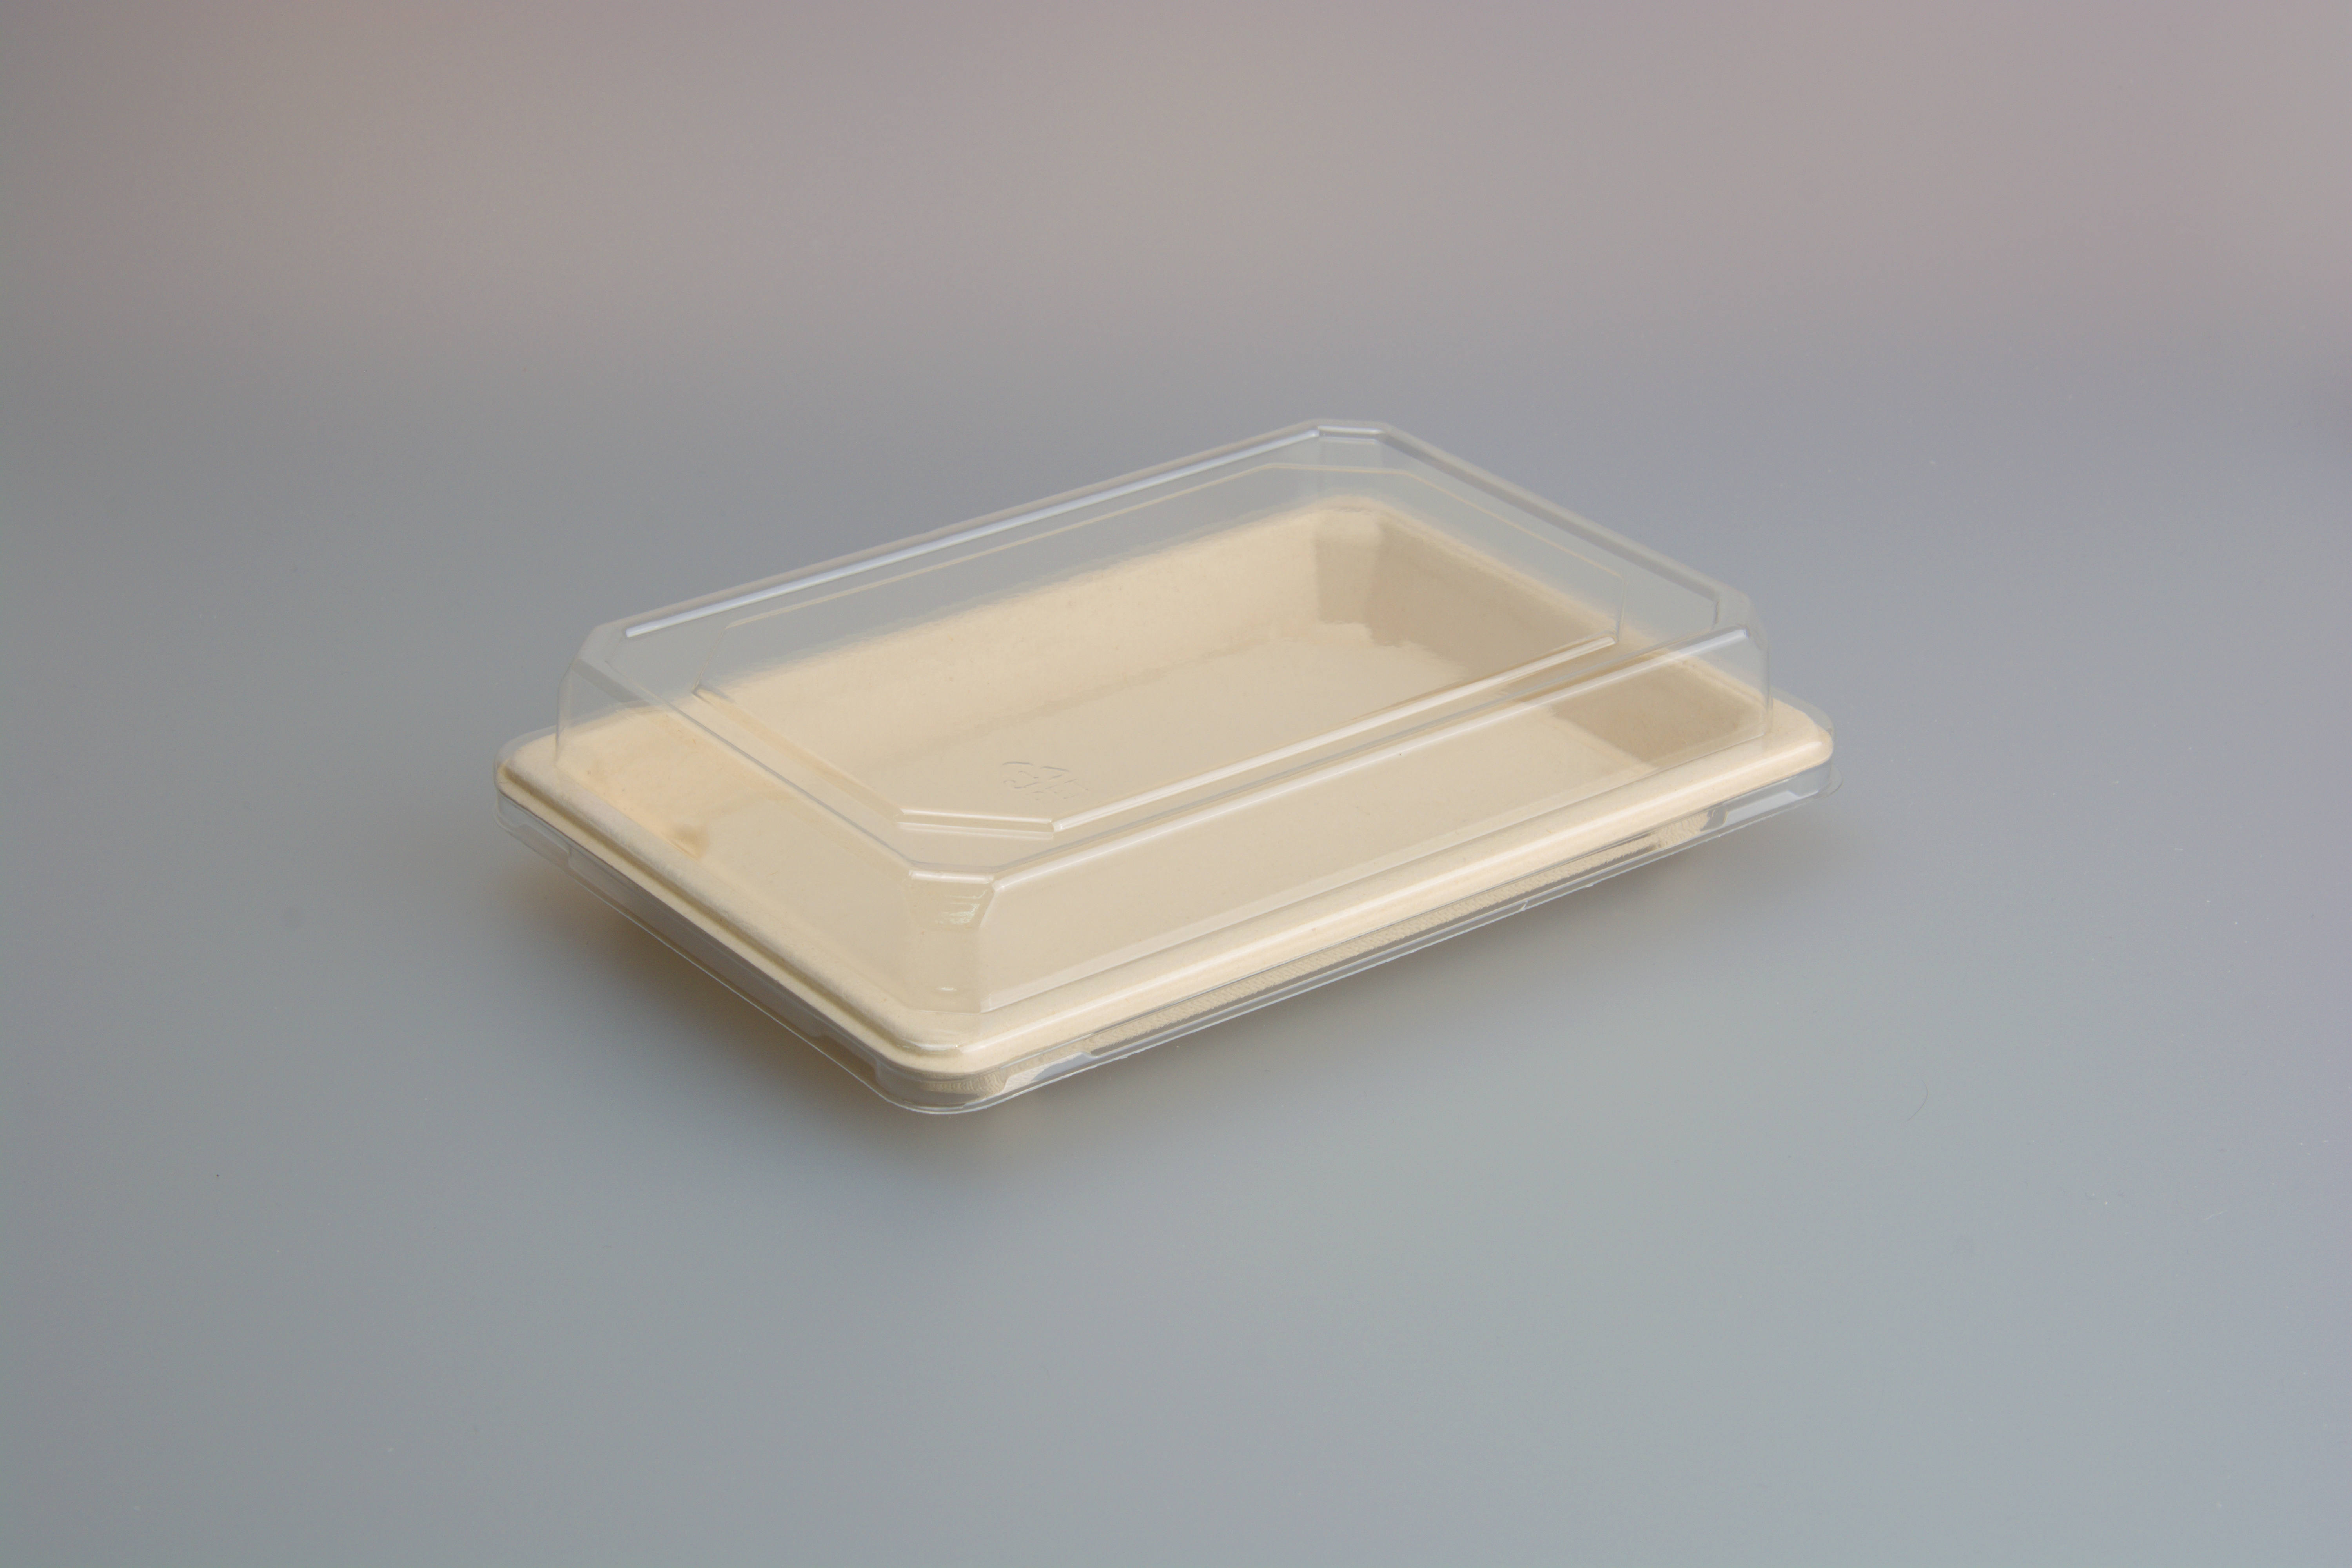 Factory made hot-sale Bagasse Boxes - 7.3*5.0 INCH Sushi Trays, Disposable Sushi Containers With Lids – Short, Take Out Containers For Appetizers, Entrees, or Desserts, Black Plastic To Go C...